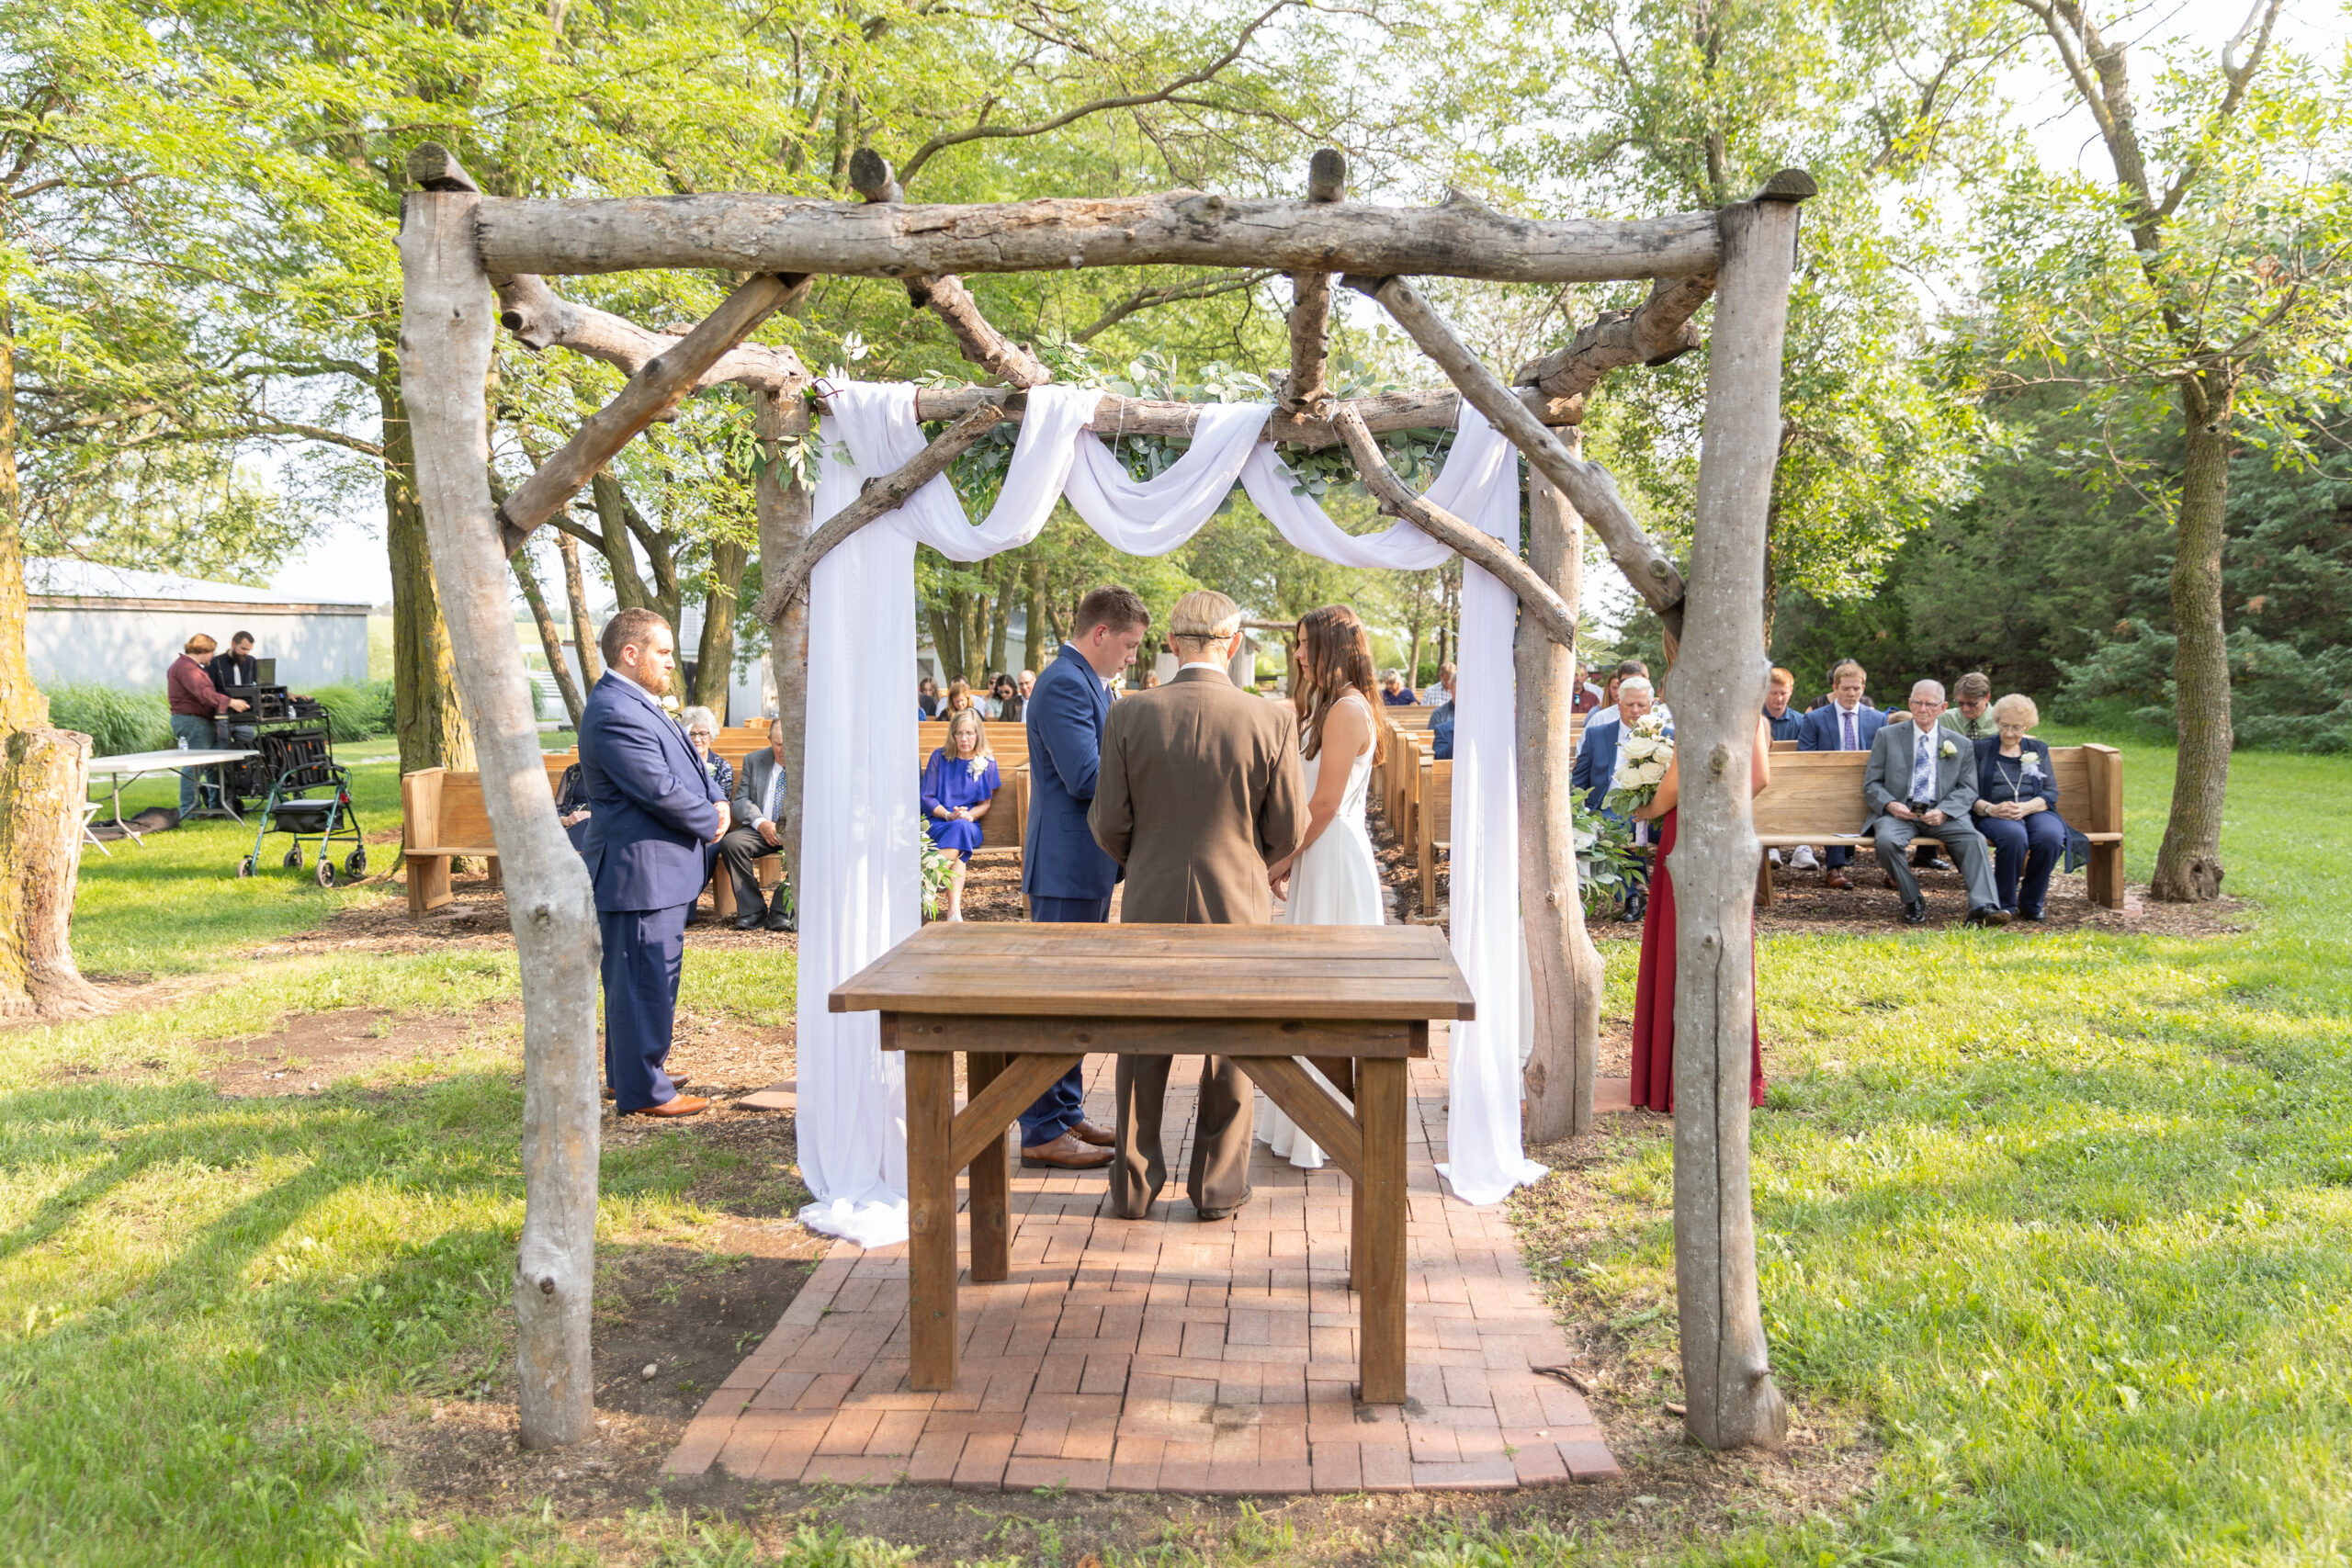 Couple gets married under wooden alter